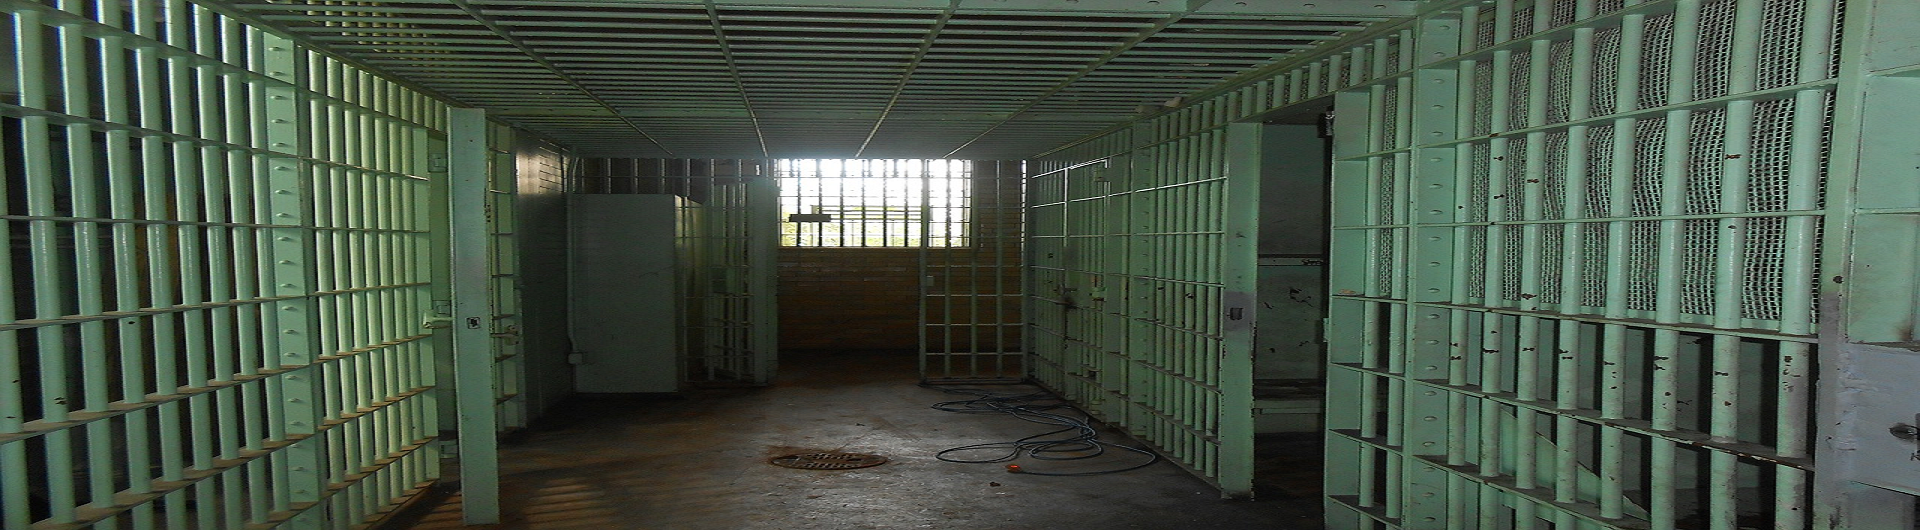 Detention Cells in a United States prison